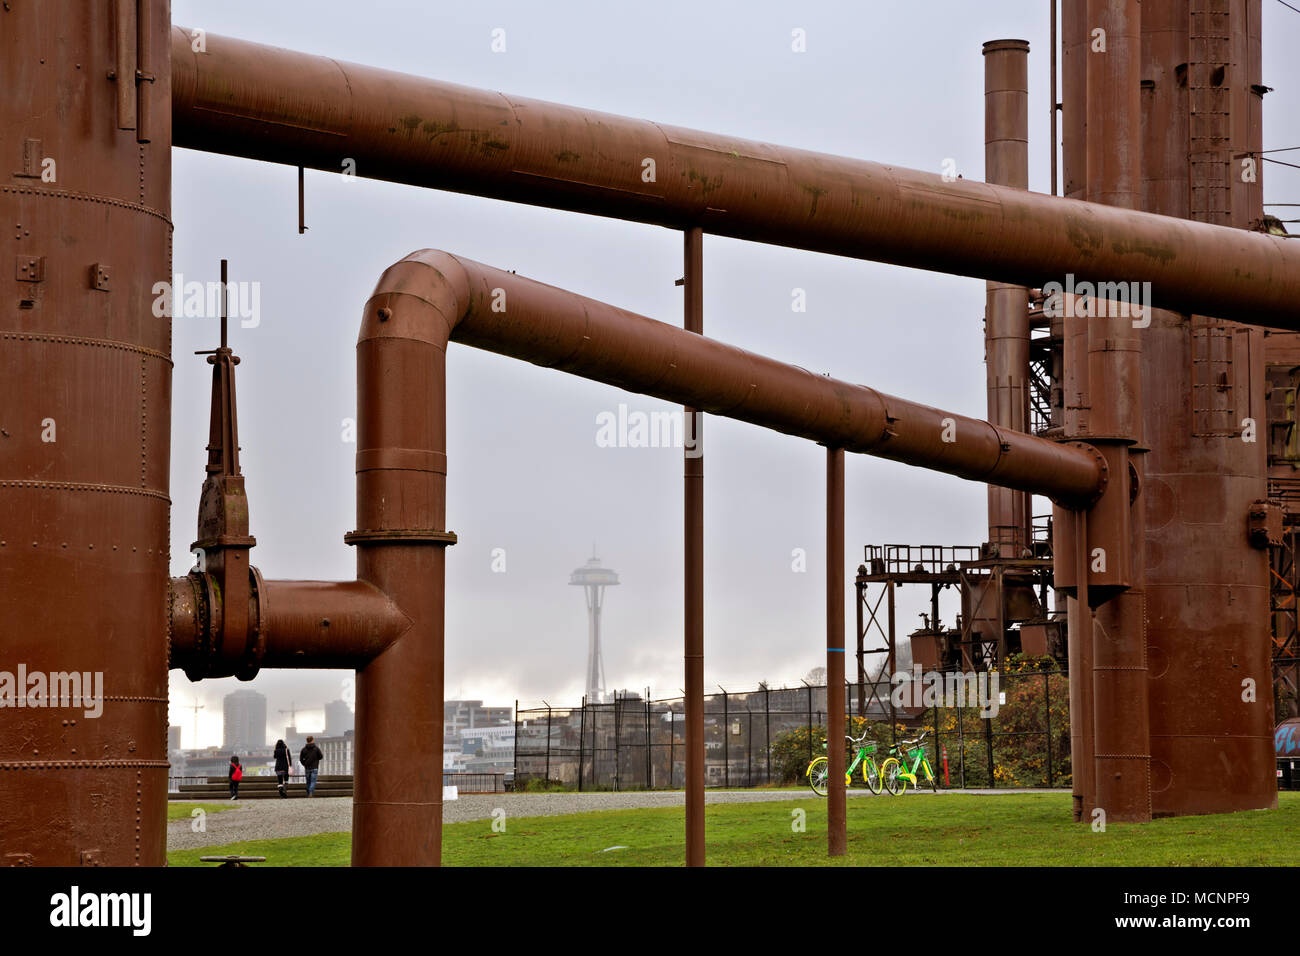 WA15260-00...WASHINGTON - Rainy day at Seattle's Gas Works Park, located at the north end of Lake Union with the Space Needle in the distance. 2017 Stock Photo